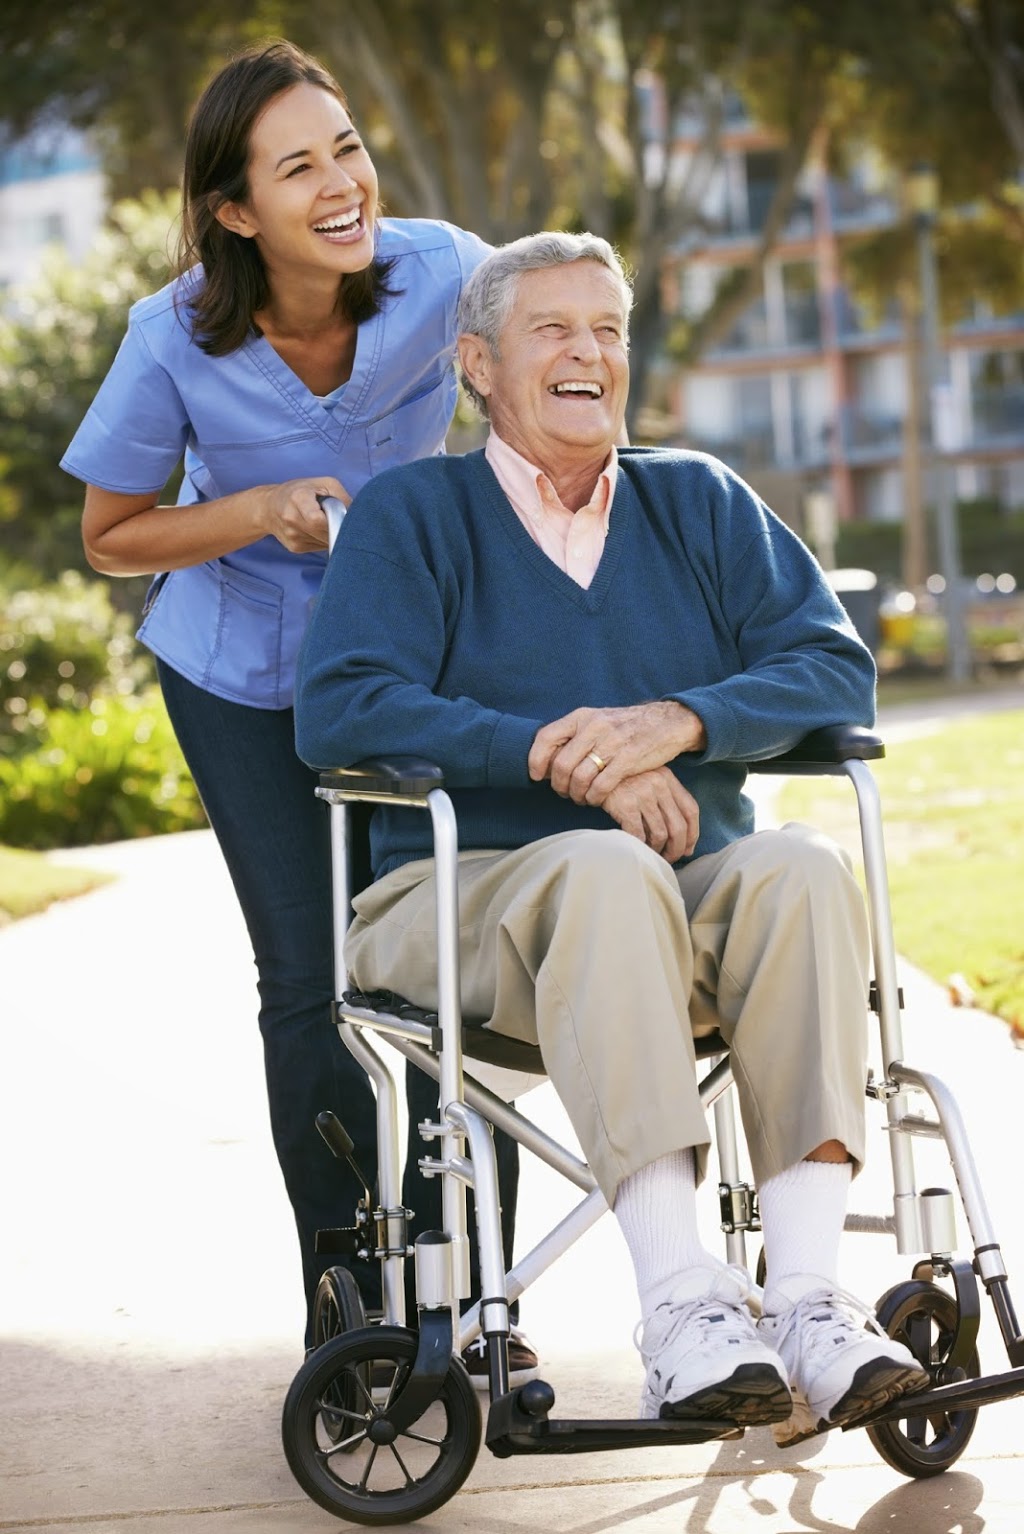 Assisting Hands Home Care - Hollywood, FL & Surrounding Areas | 9720 Stirling Rd #106, Hollywood, FL 33024 | Phone: (954) 644-7276